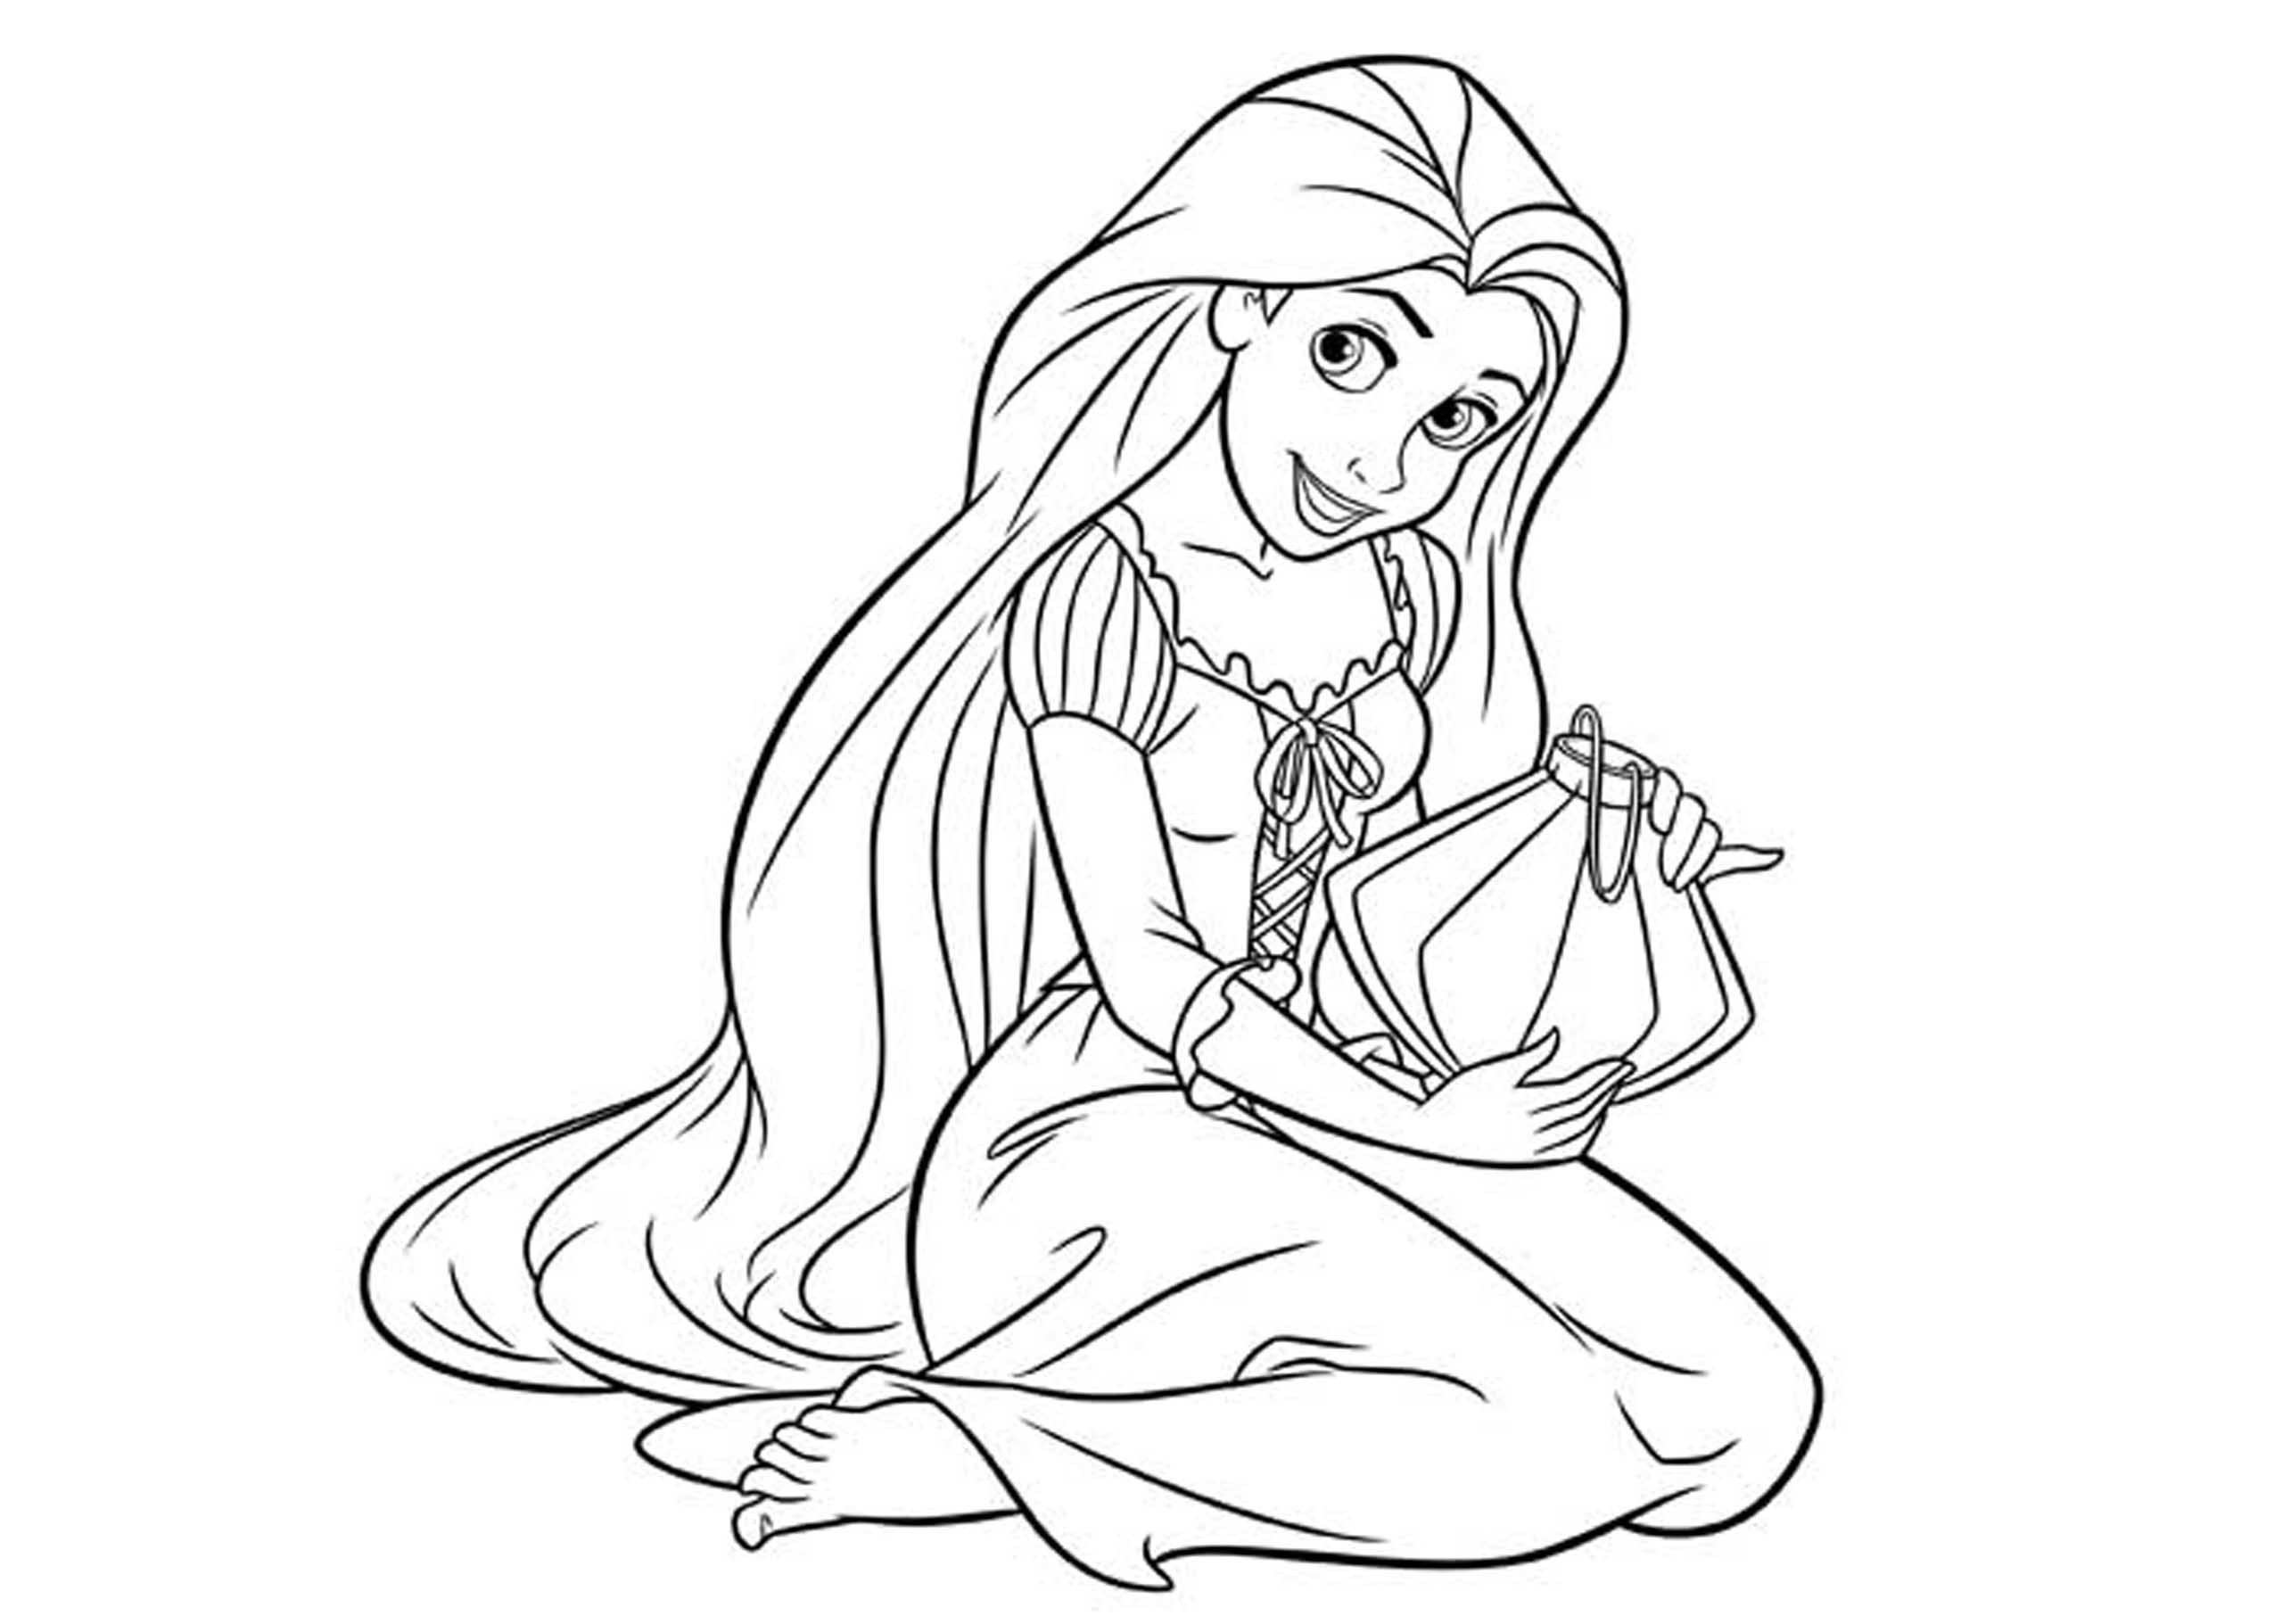 Princess Coloring Pages to Print Wallpaper